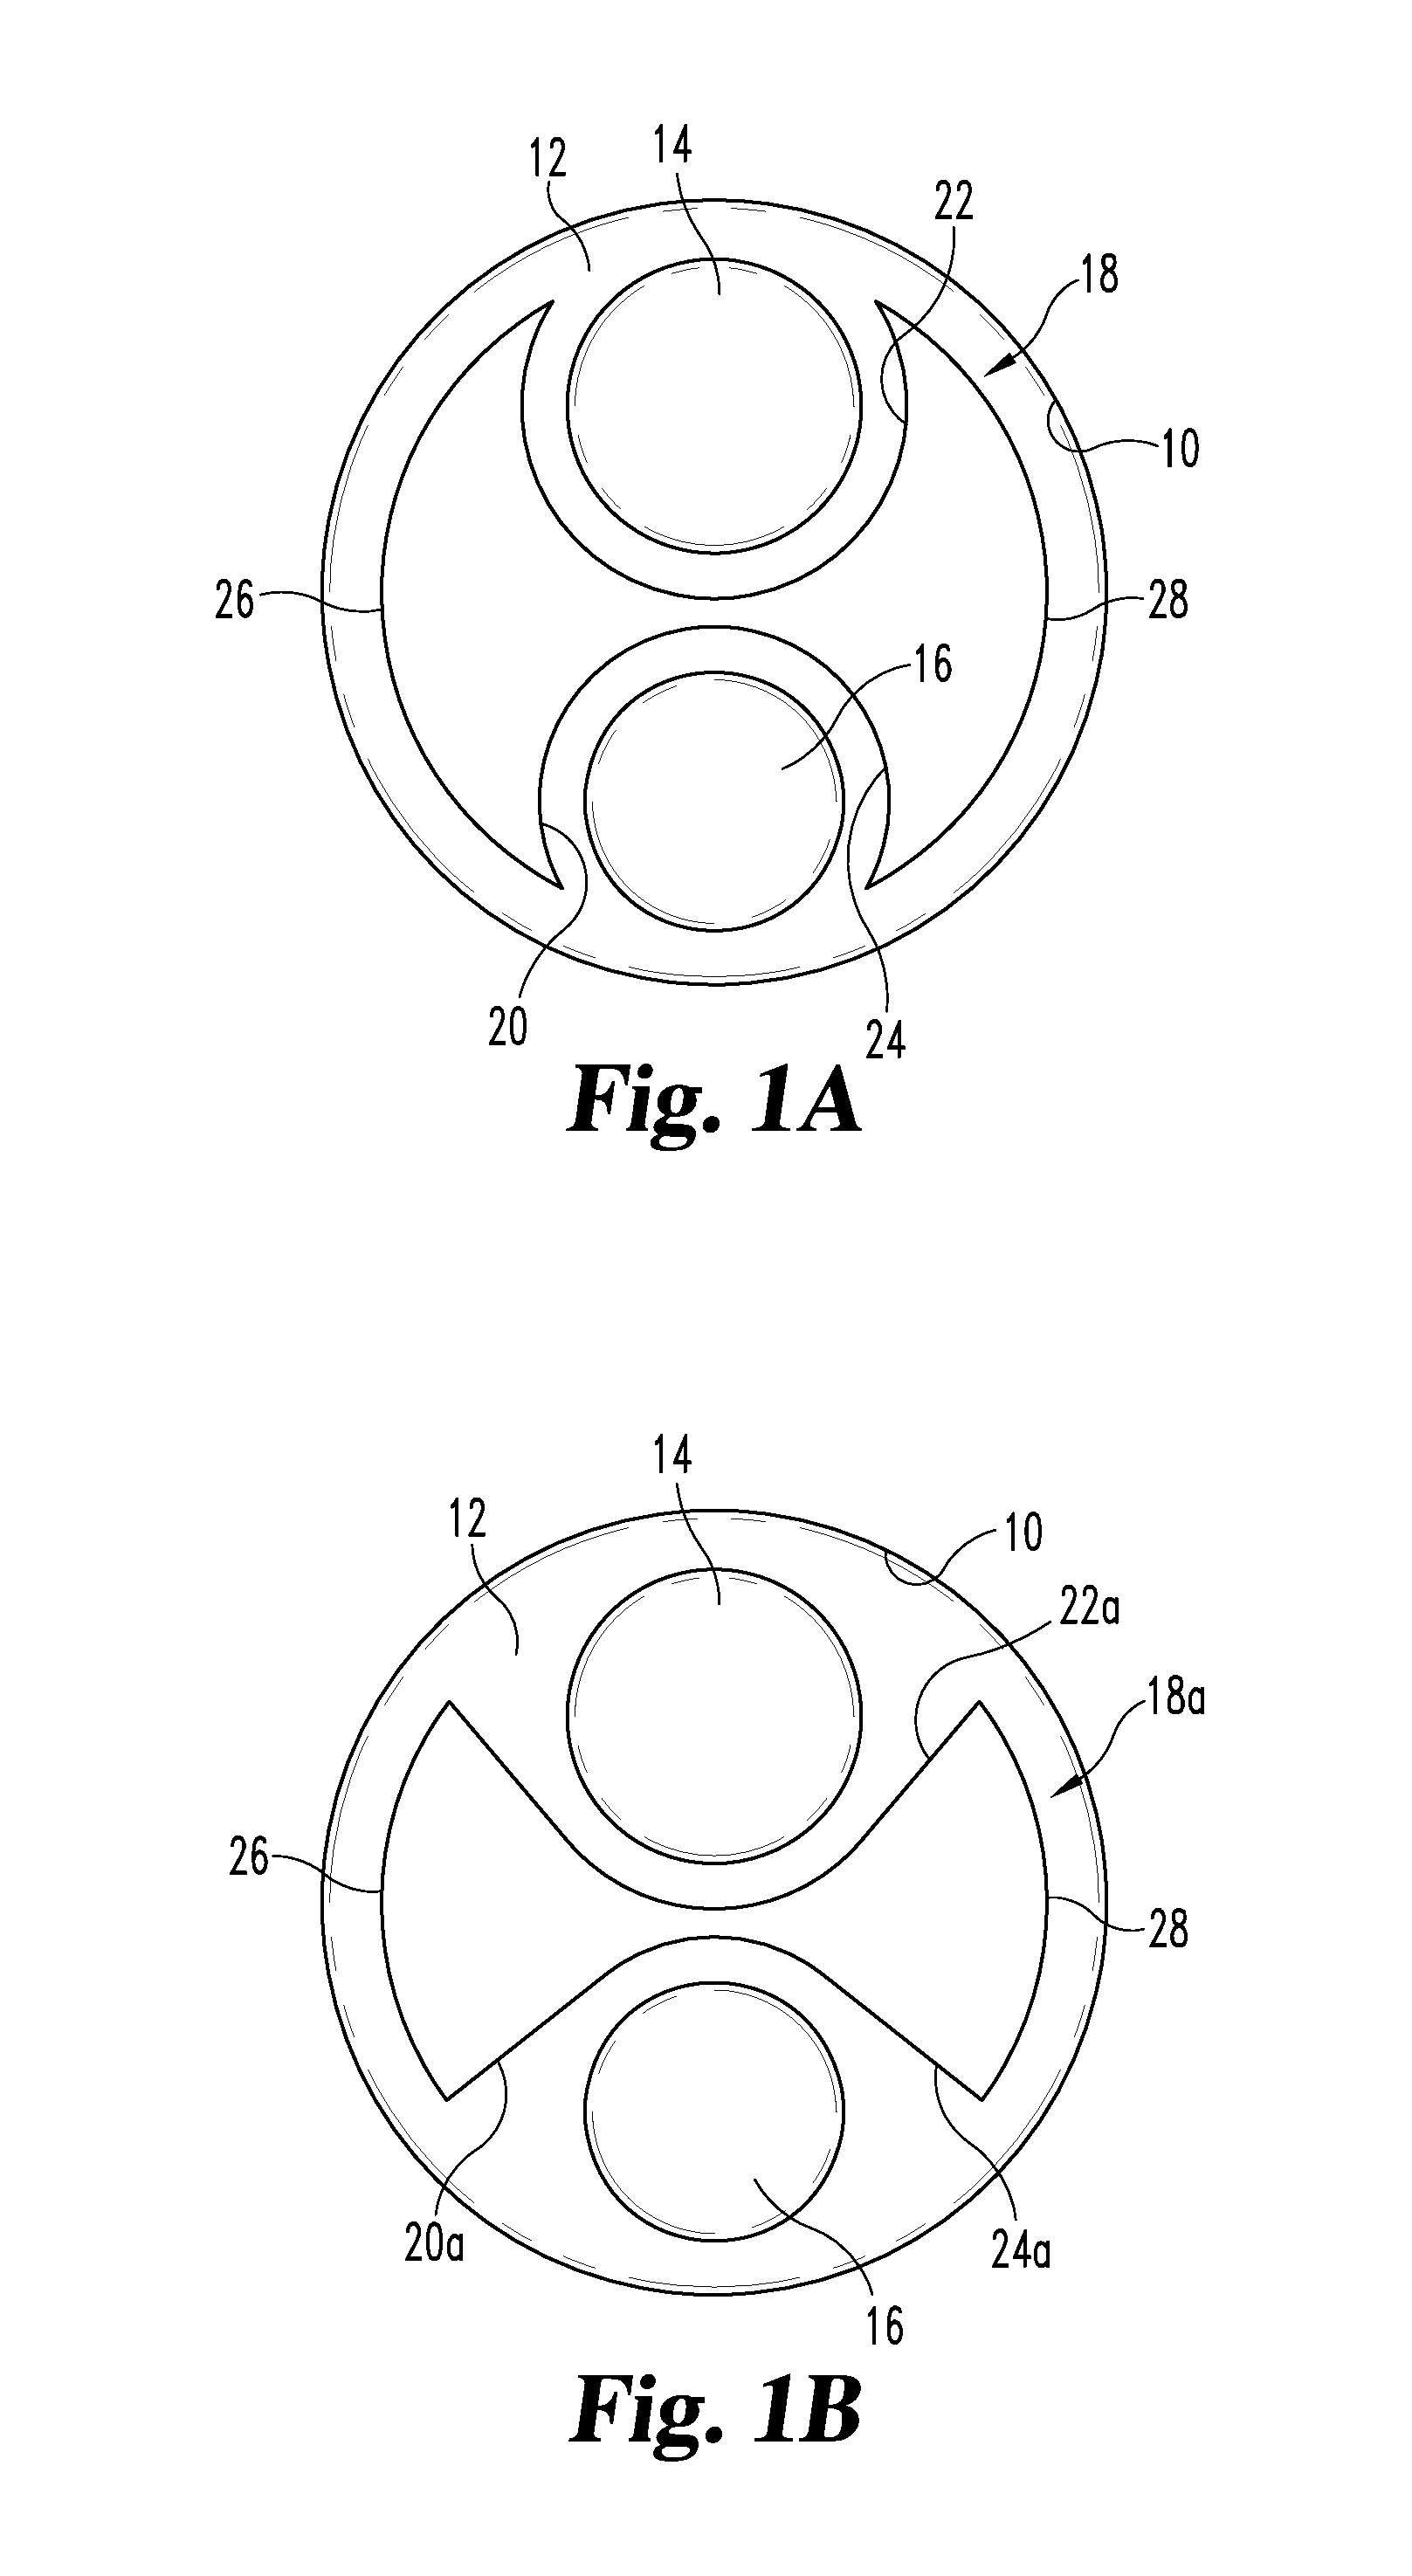 Induction driven ignition system